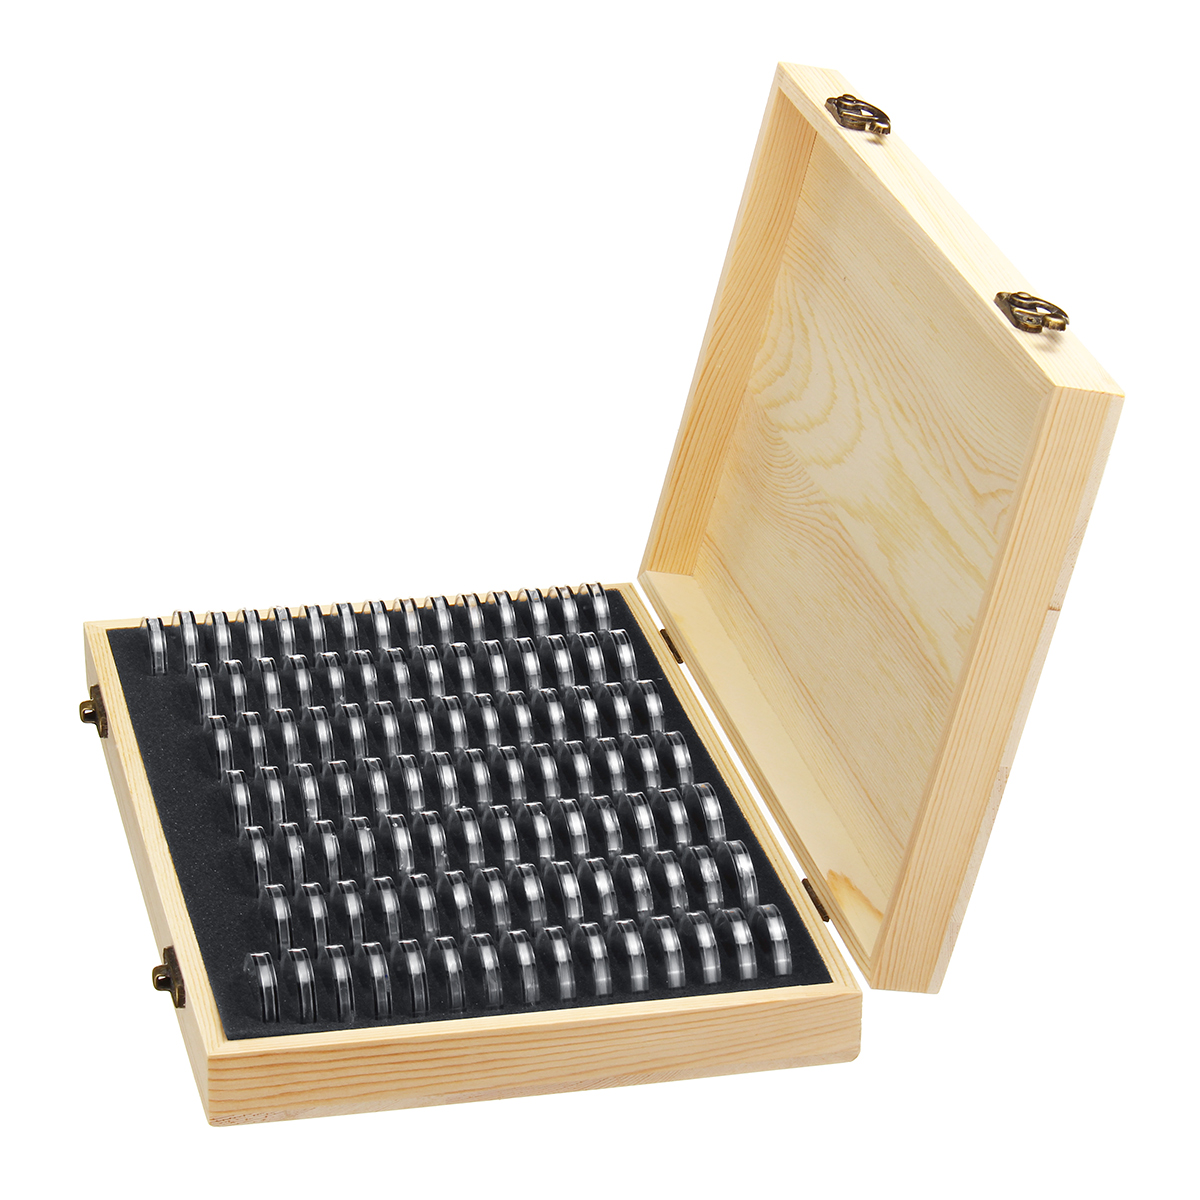 100PCS Rugged Wooden Commemorative Coin Display Case Capsule Holder Storage Collection Box